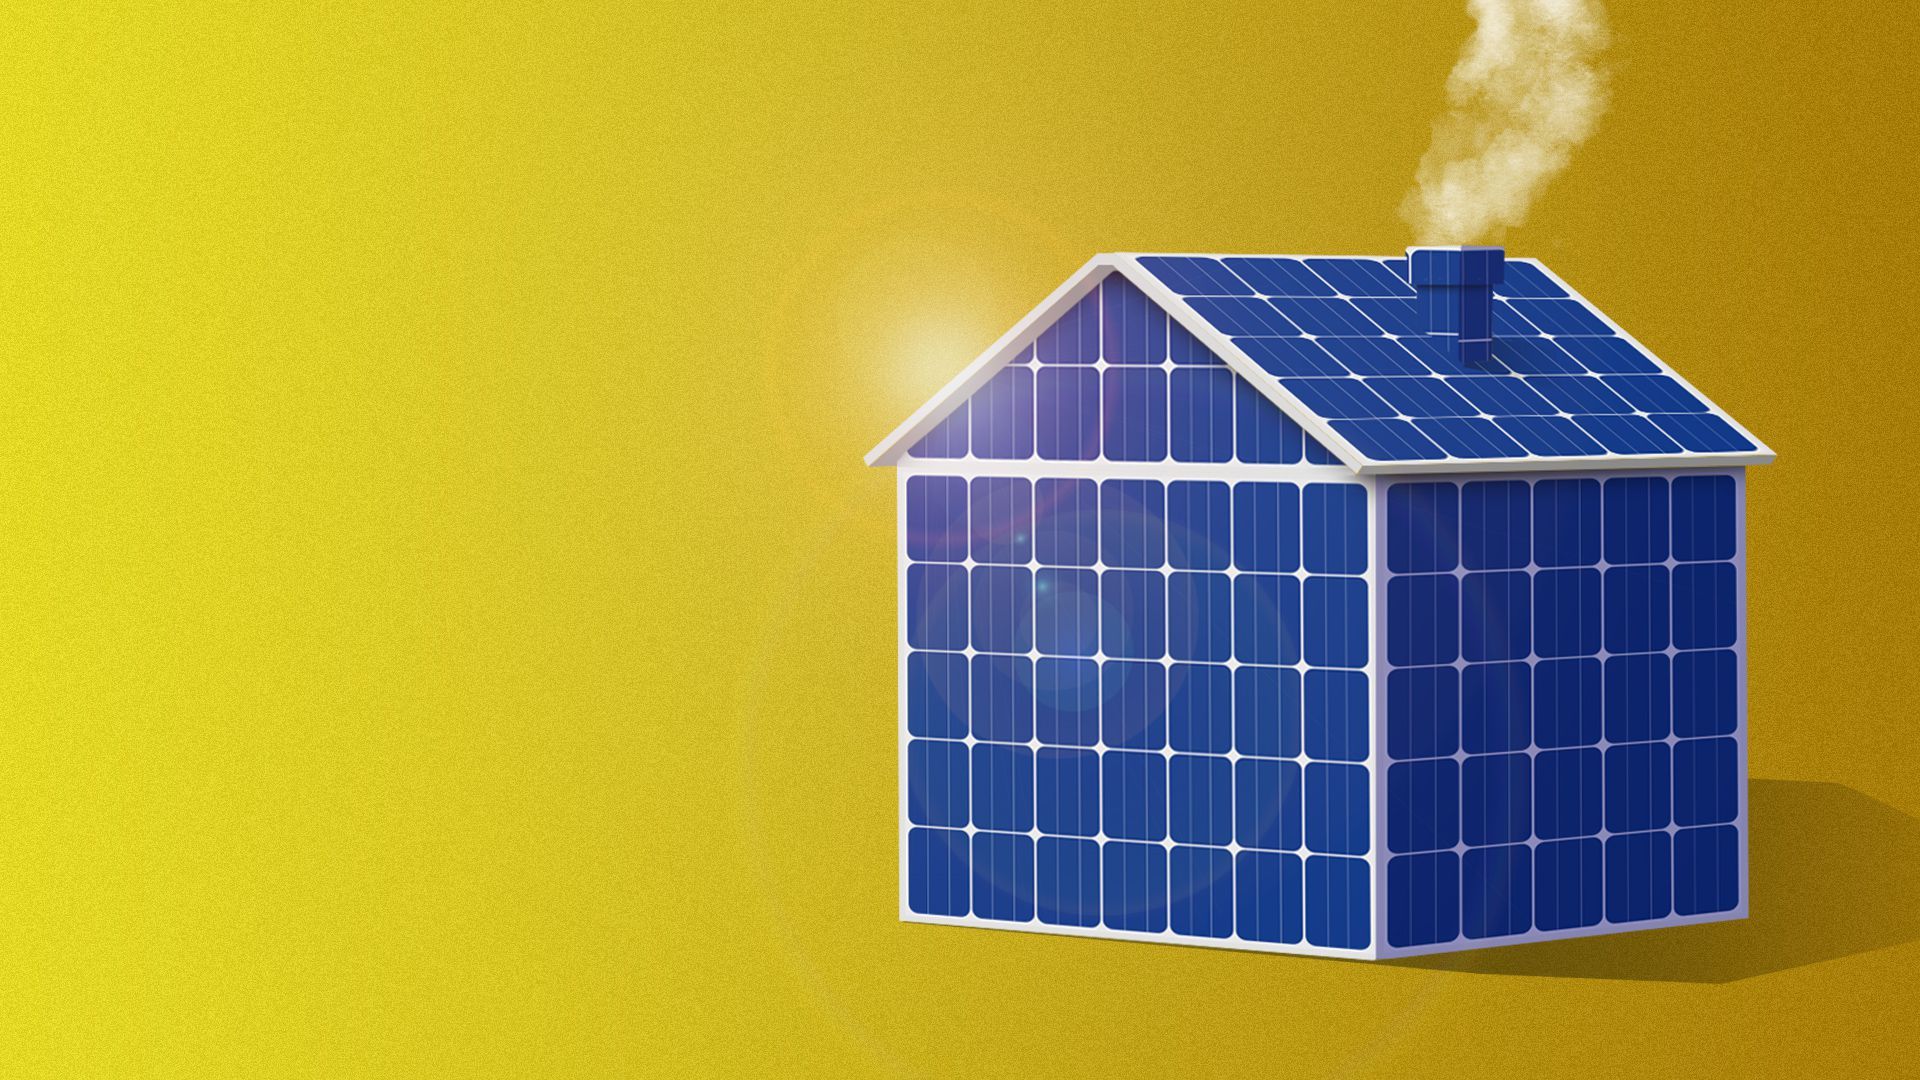 Illustration of a house made completely out of solar panels. 